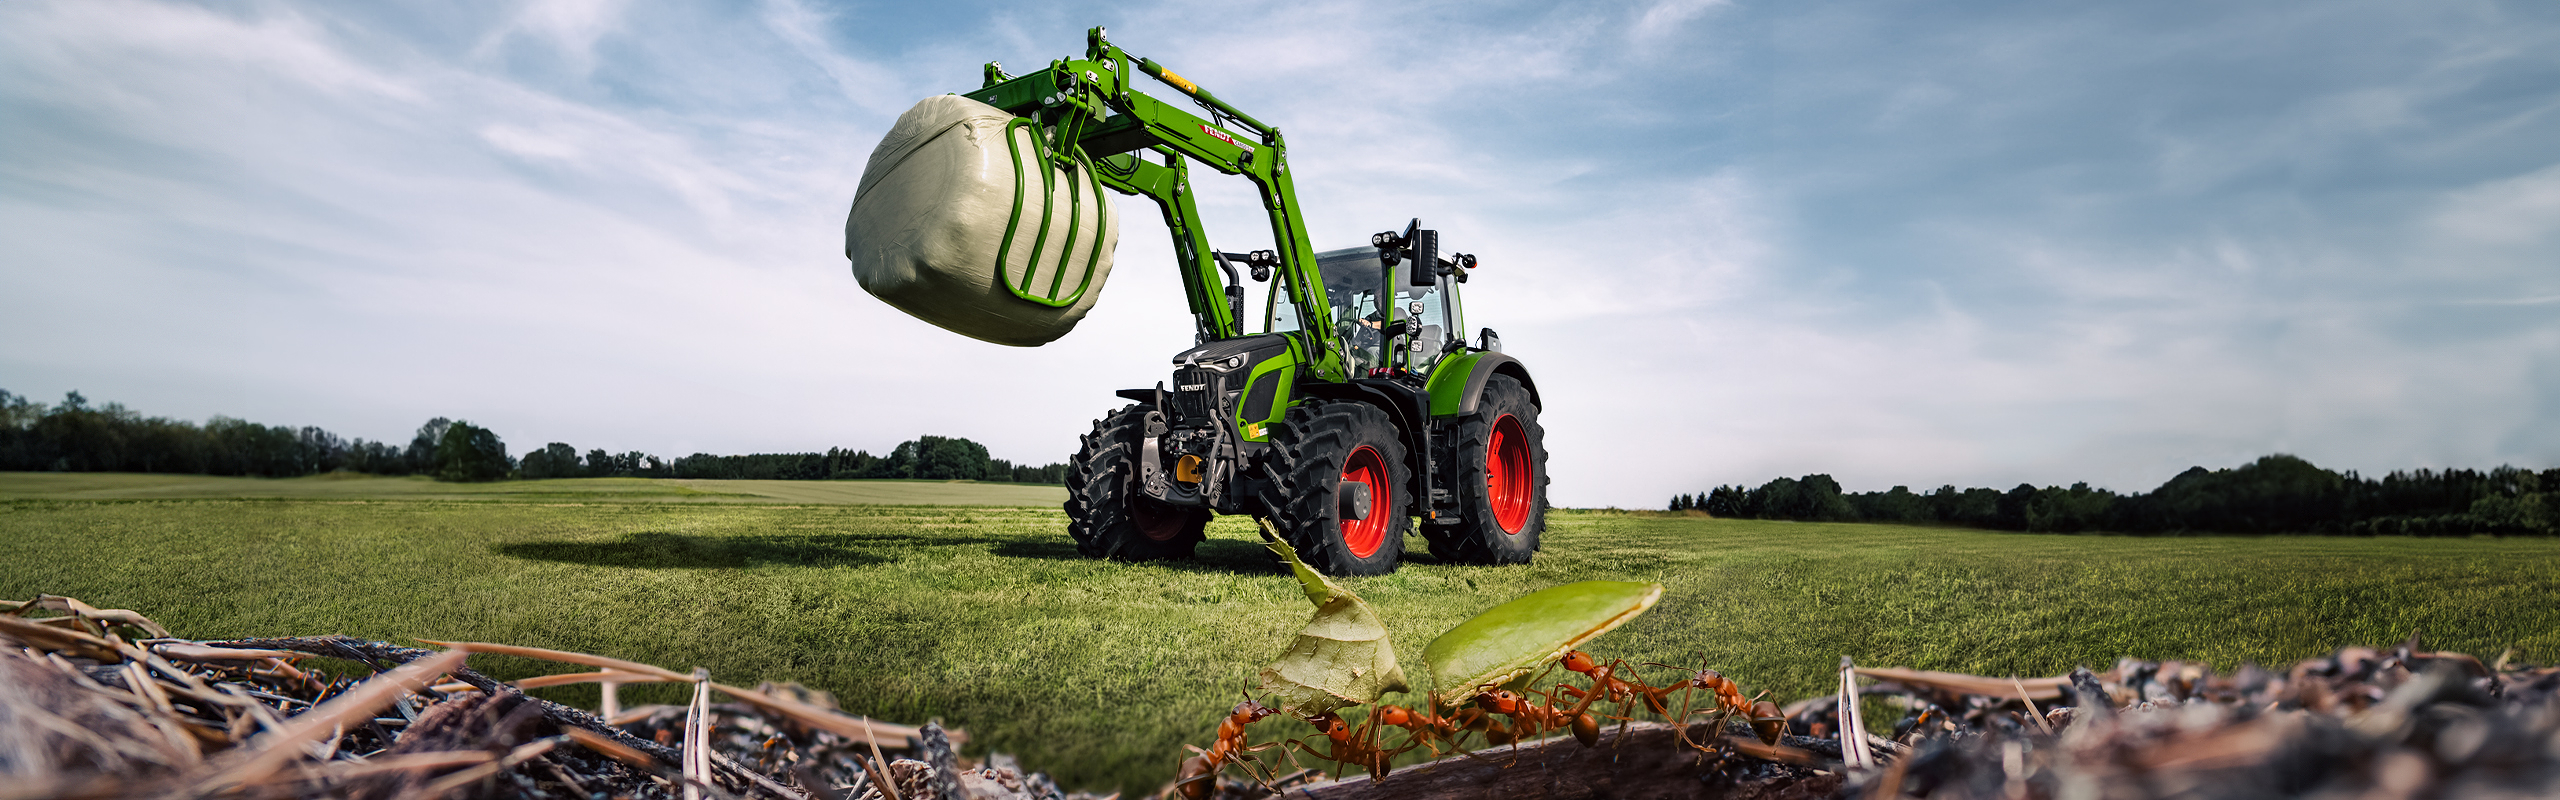 Fendt 600 Vario with front loader on a field with ants in the foreground